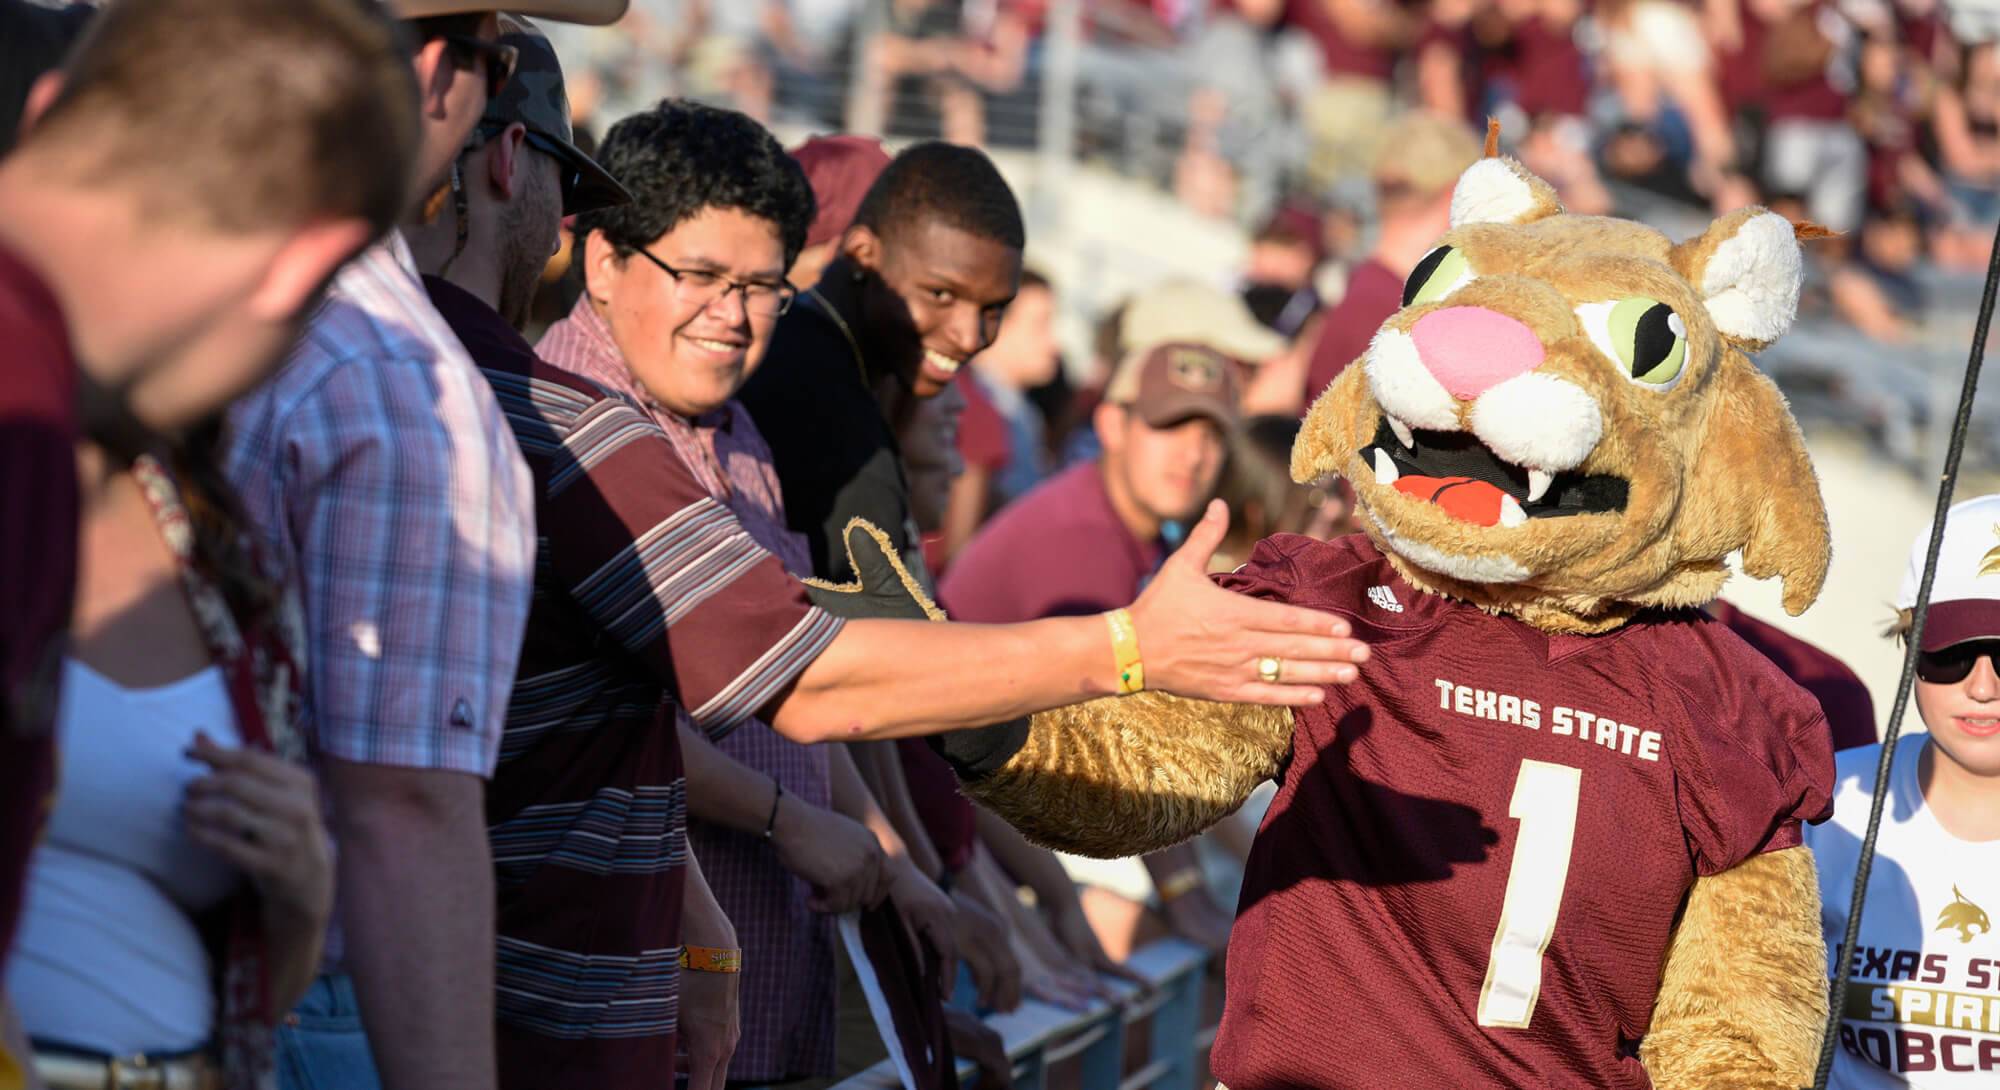 Texas State mascot, Boko the Bobcat, shaking hands with a row students at the football stadium.